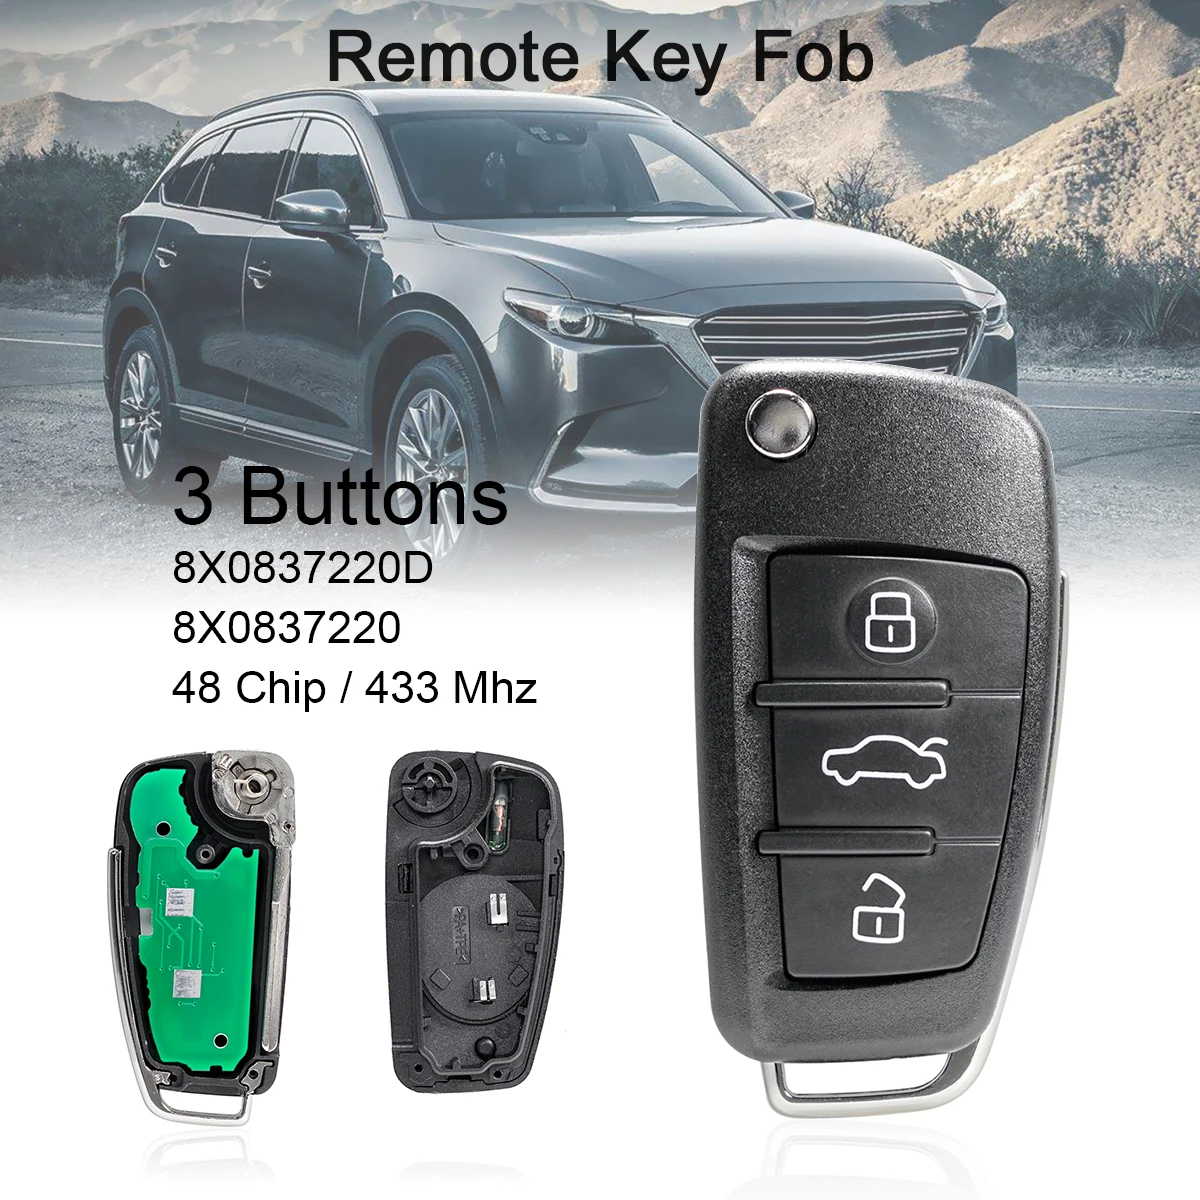 433Mhz 3 Buttons Car Remote Key ID48 Chip /8X0837220D 8X0837220 Fit for Audi A1 Q3 S1 2010 2011 2012 2013 2014 2015 2016 2017